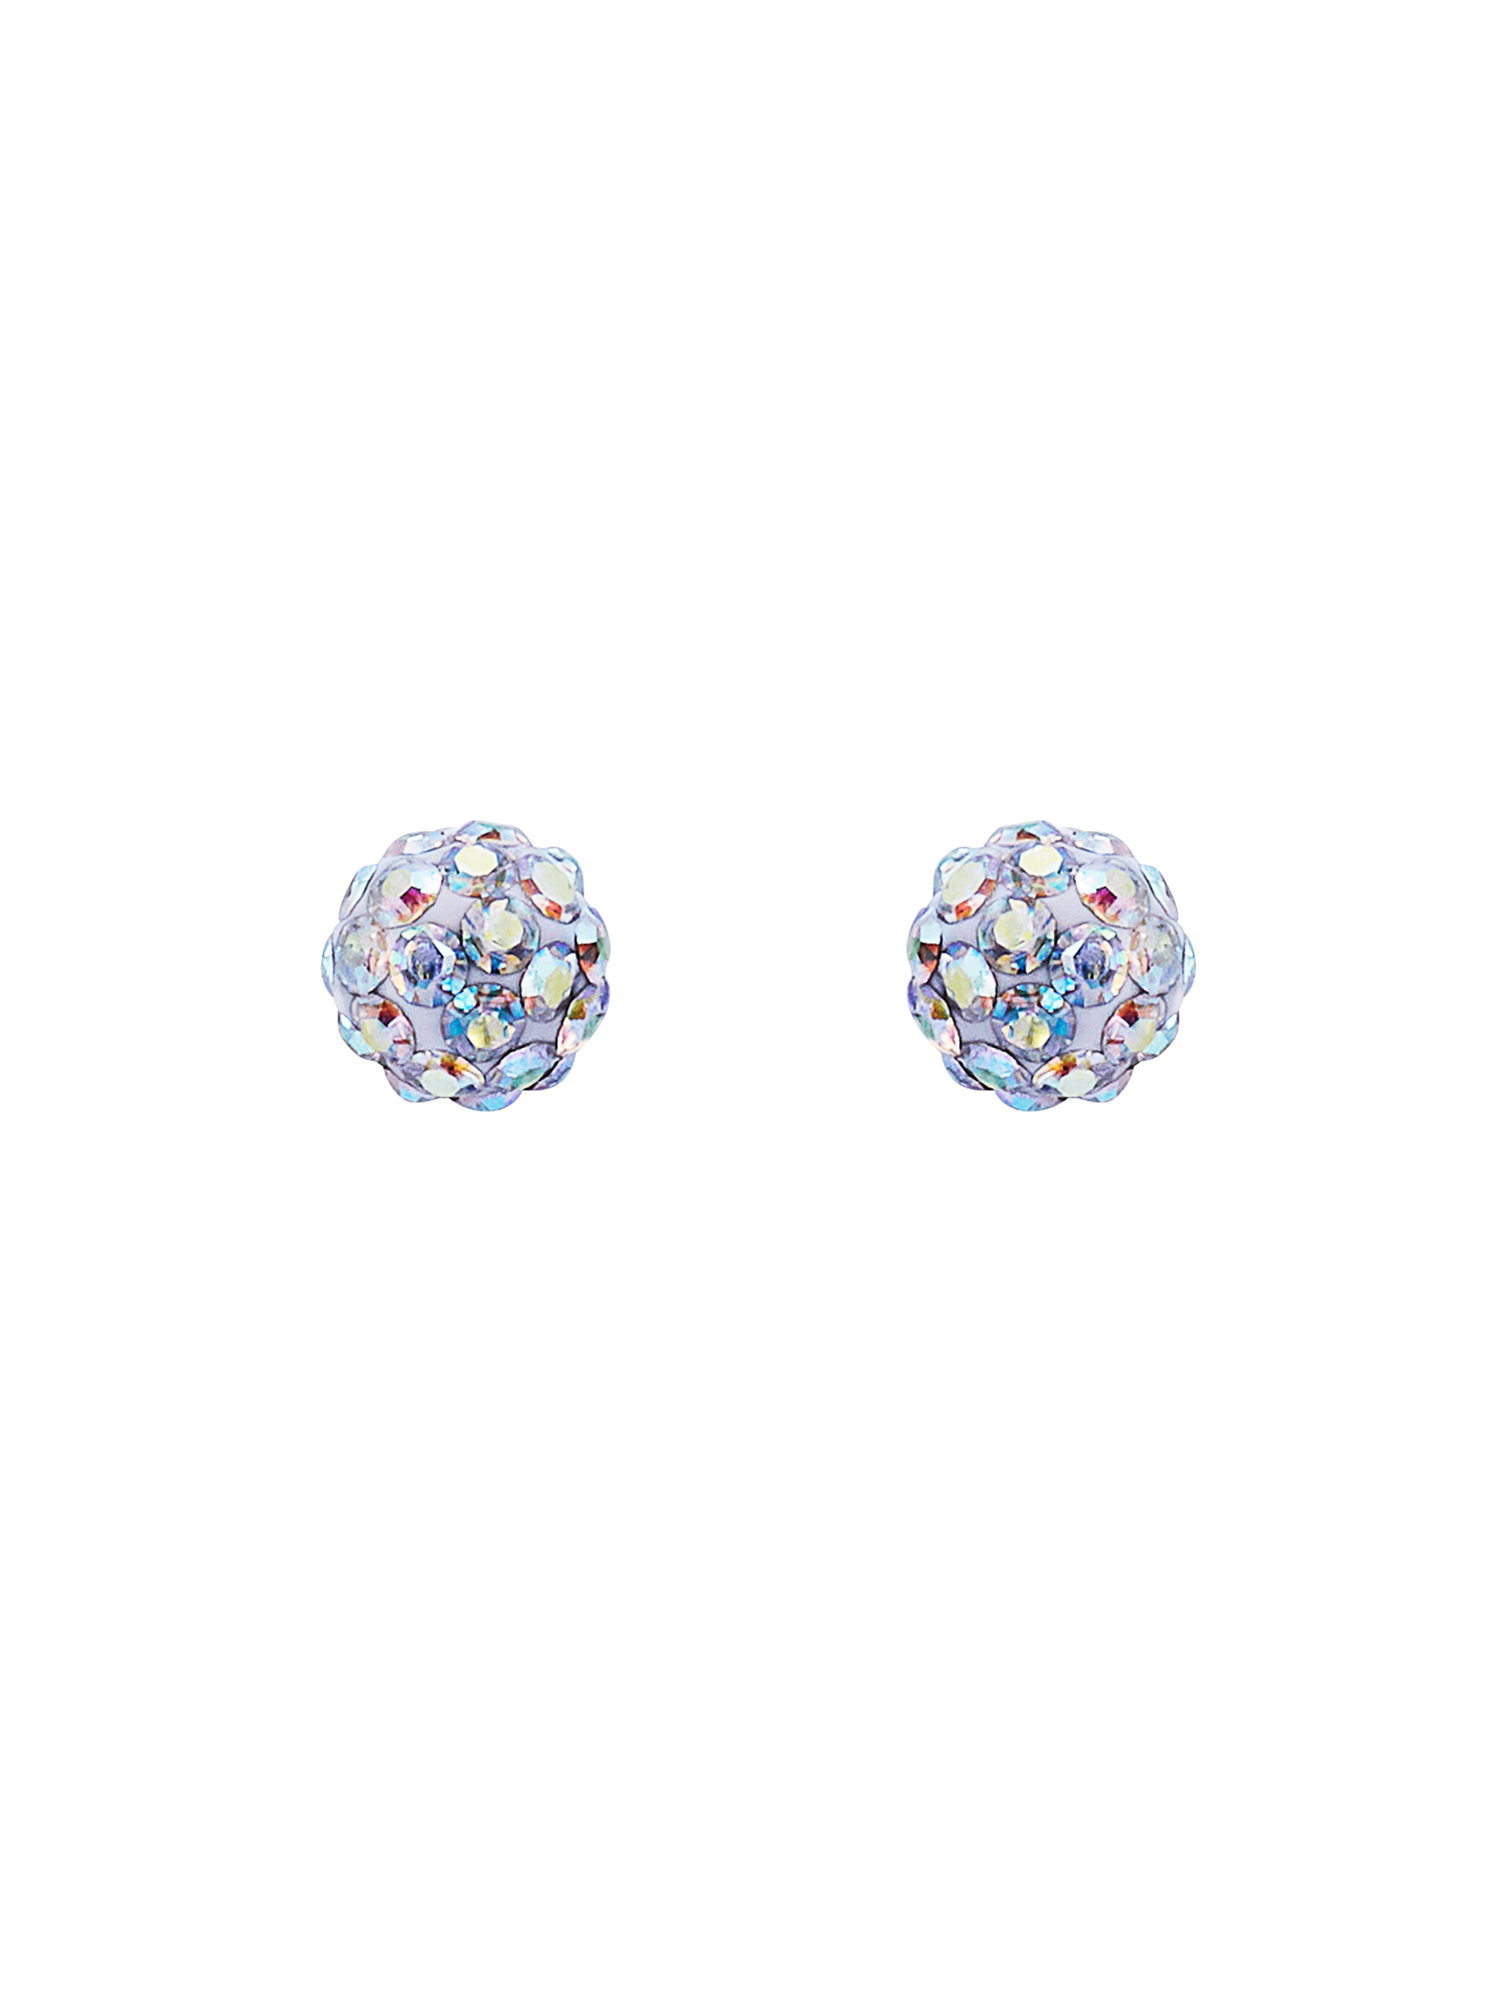 Brilliance Fine Jewelry Girls Aurora Borealis Crystals 4.8MM Ball Studs in 10K Yellow Gold - image 4 of 4